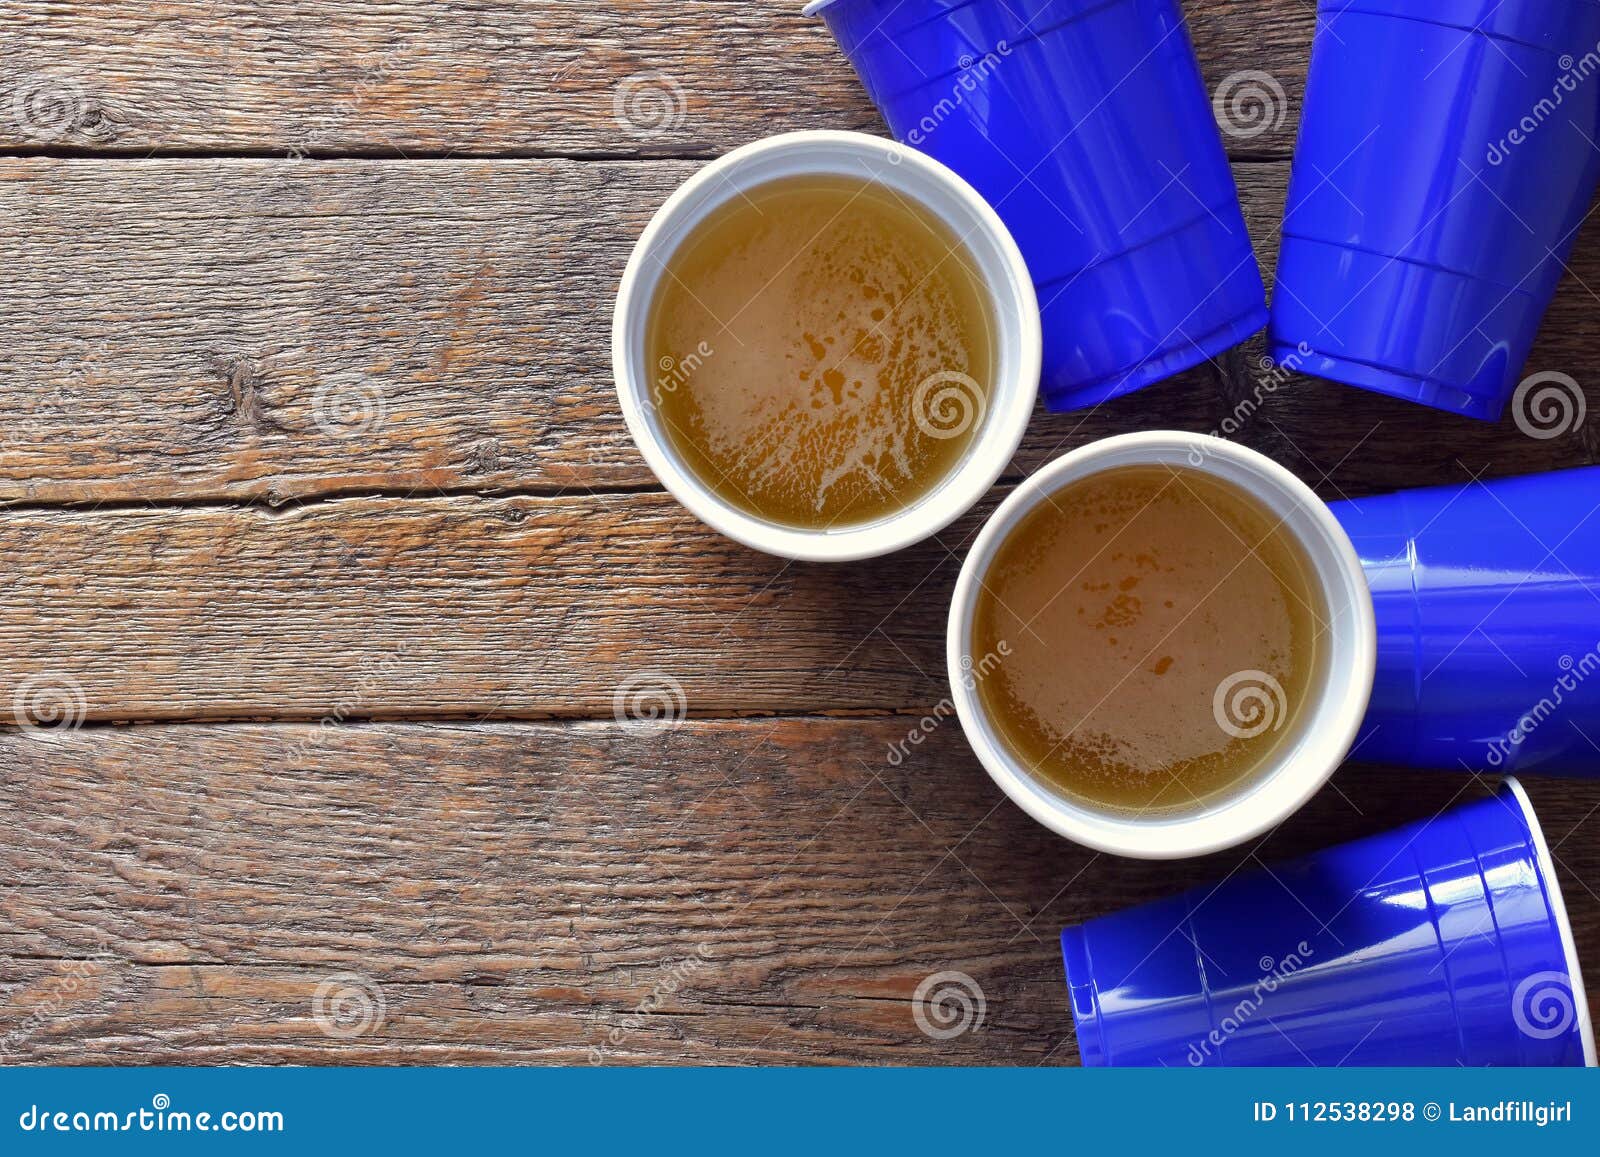 Blue Plastic Drinking Cups stock photo. Image of empty